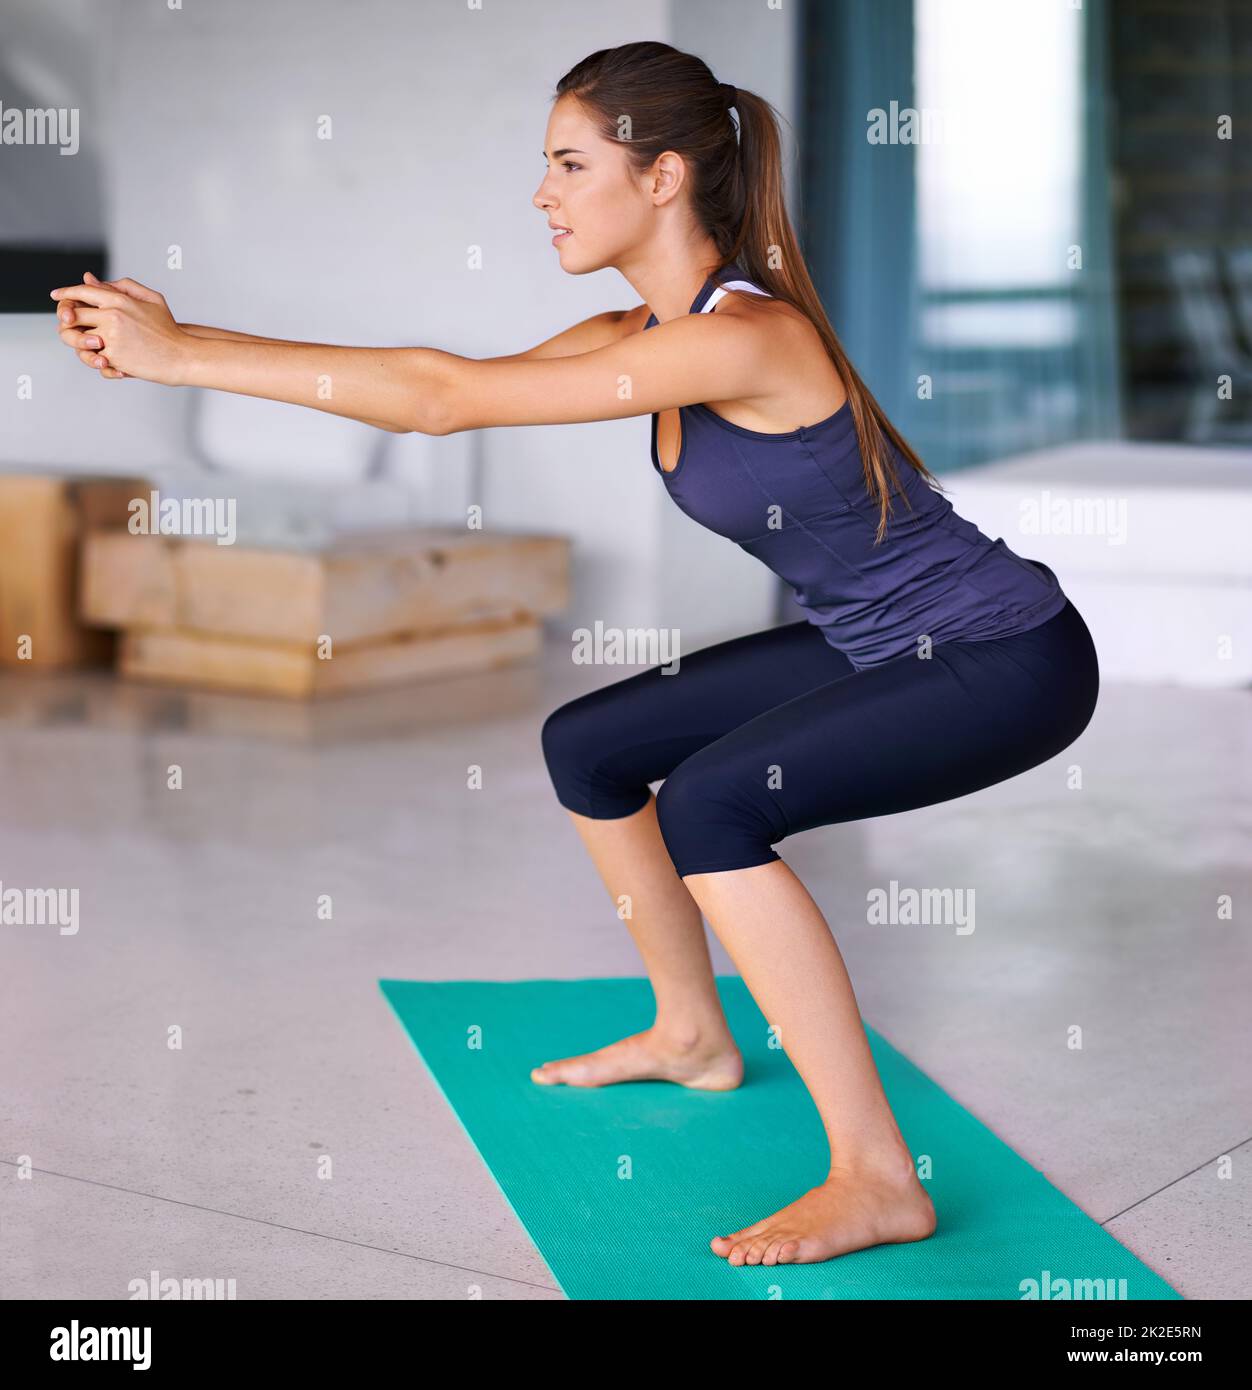 Where balance and strength meet. A side shot of a beautiful young woman doing exercise on an exercise mat. Stock Photo